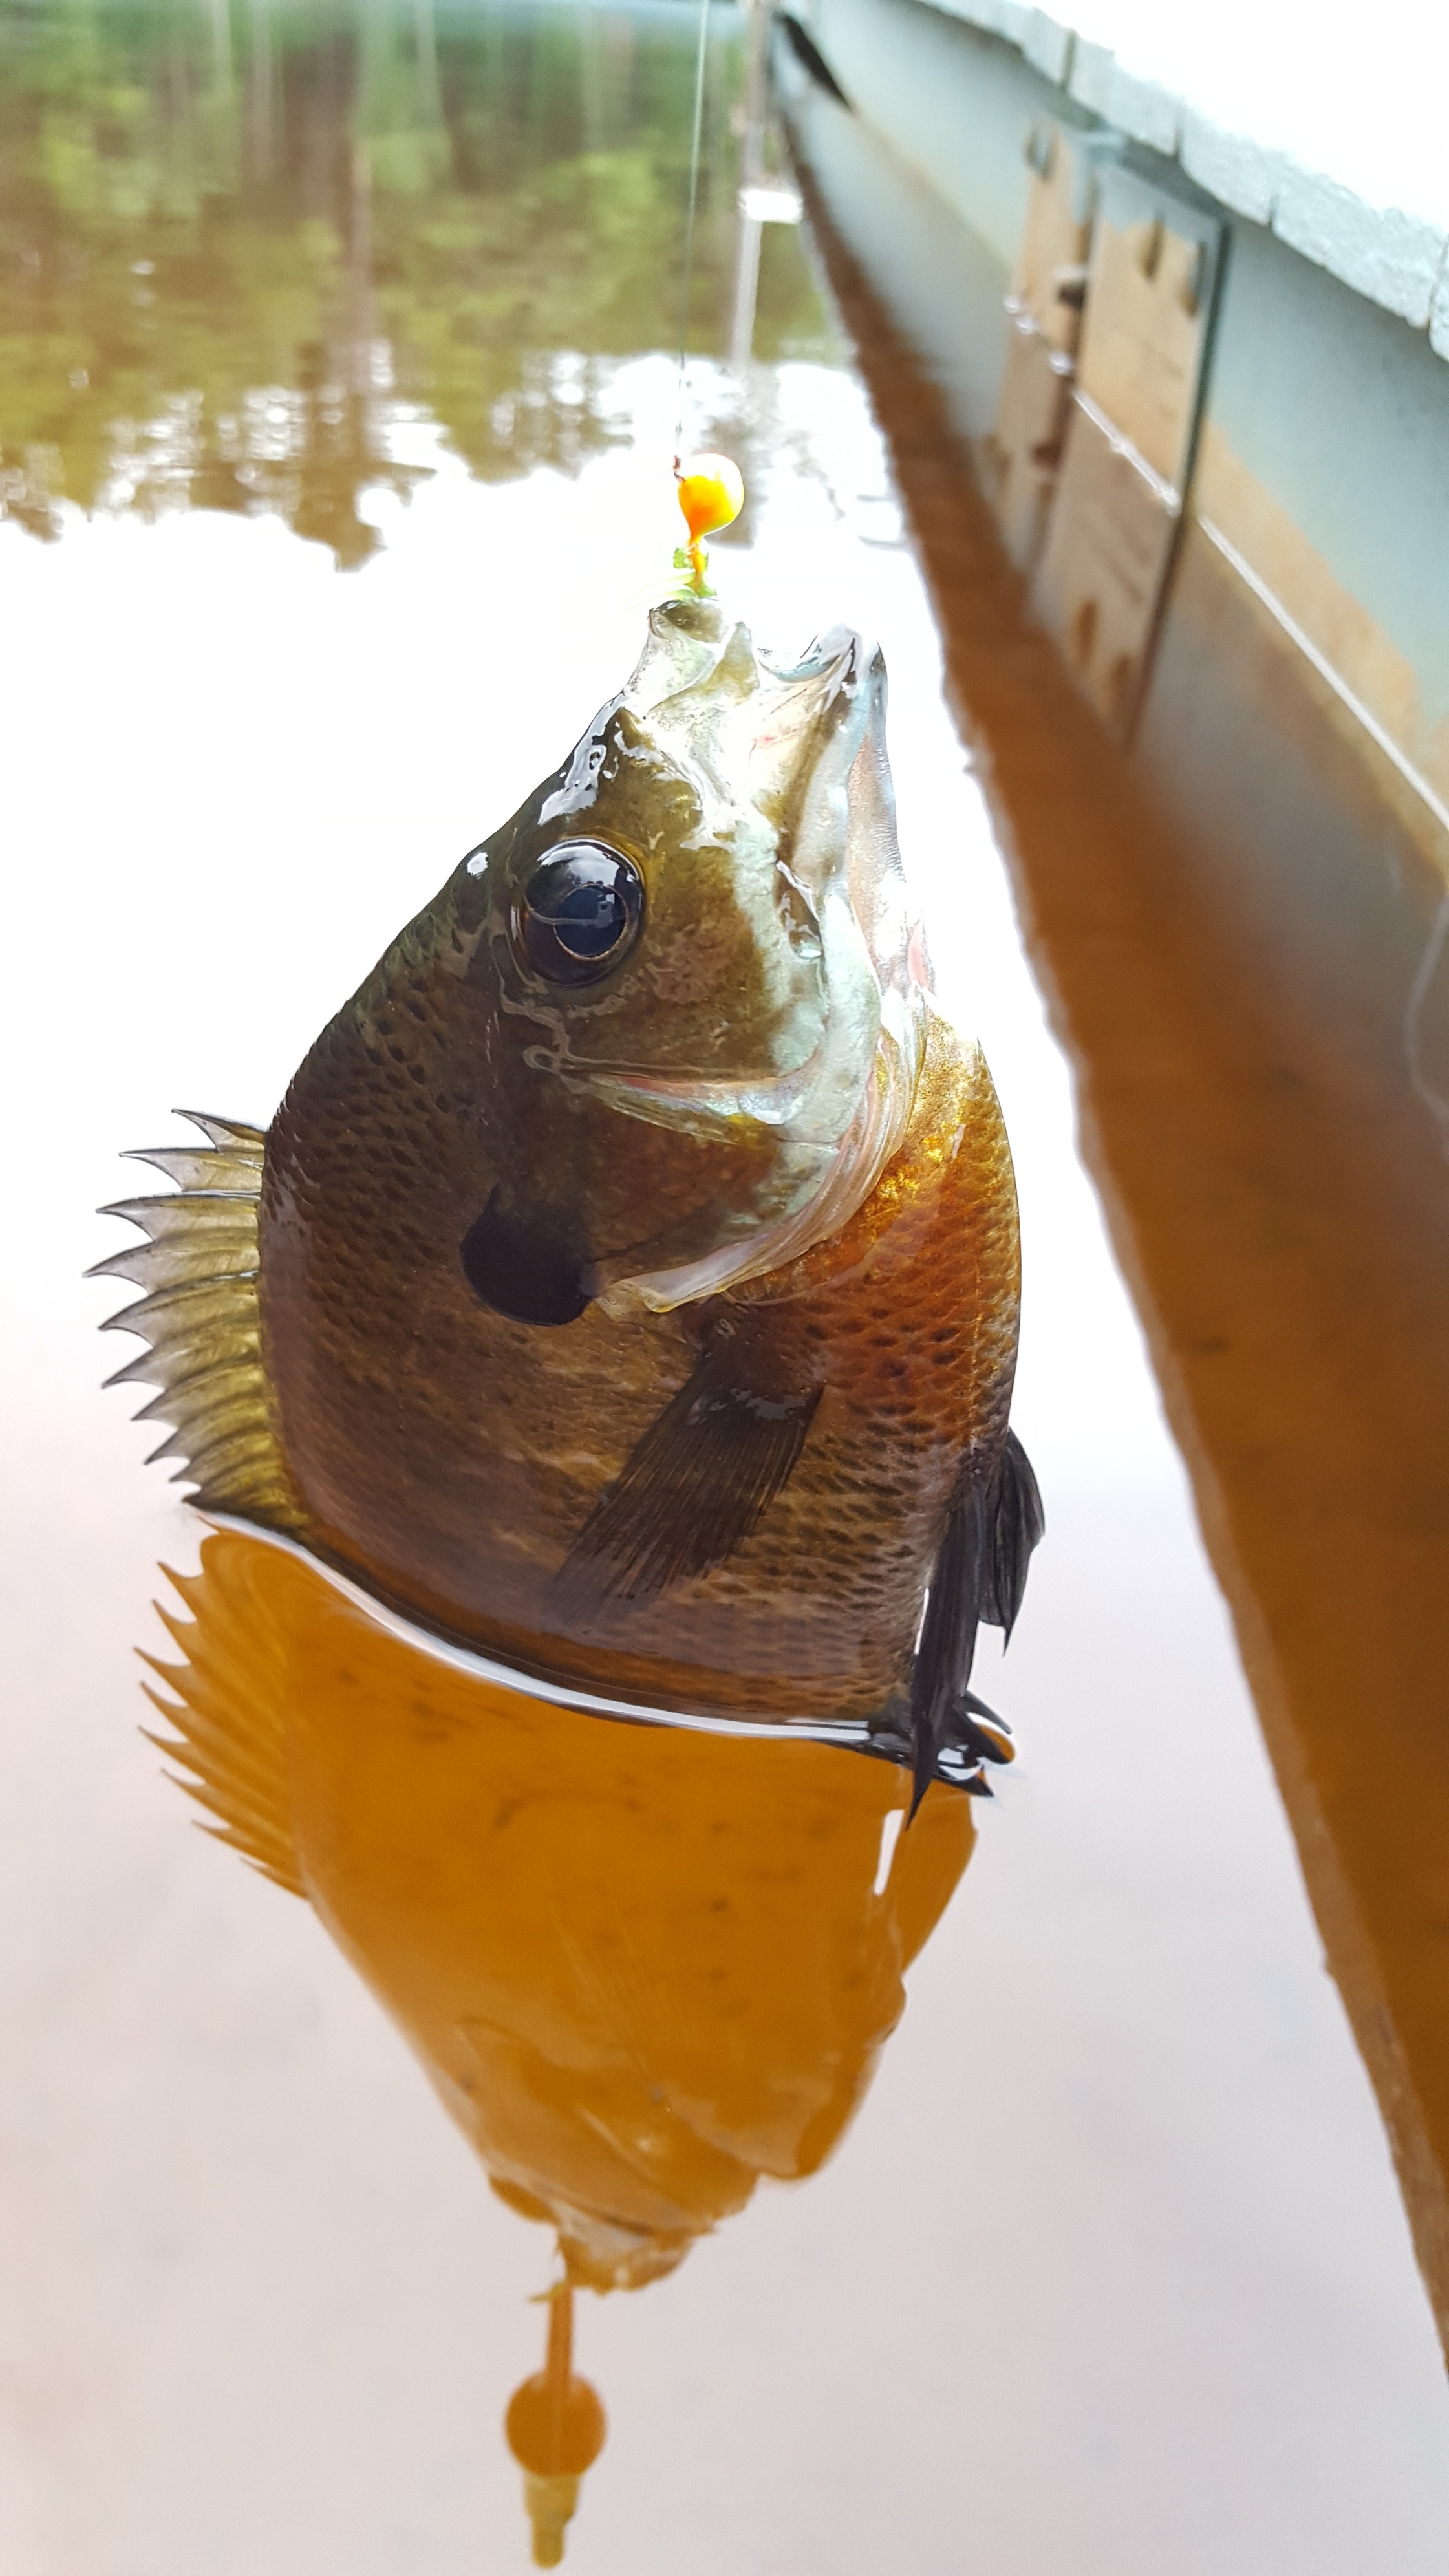 A bluegill caught while fishing off a boat dock on a lake.